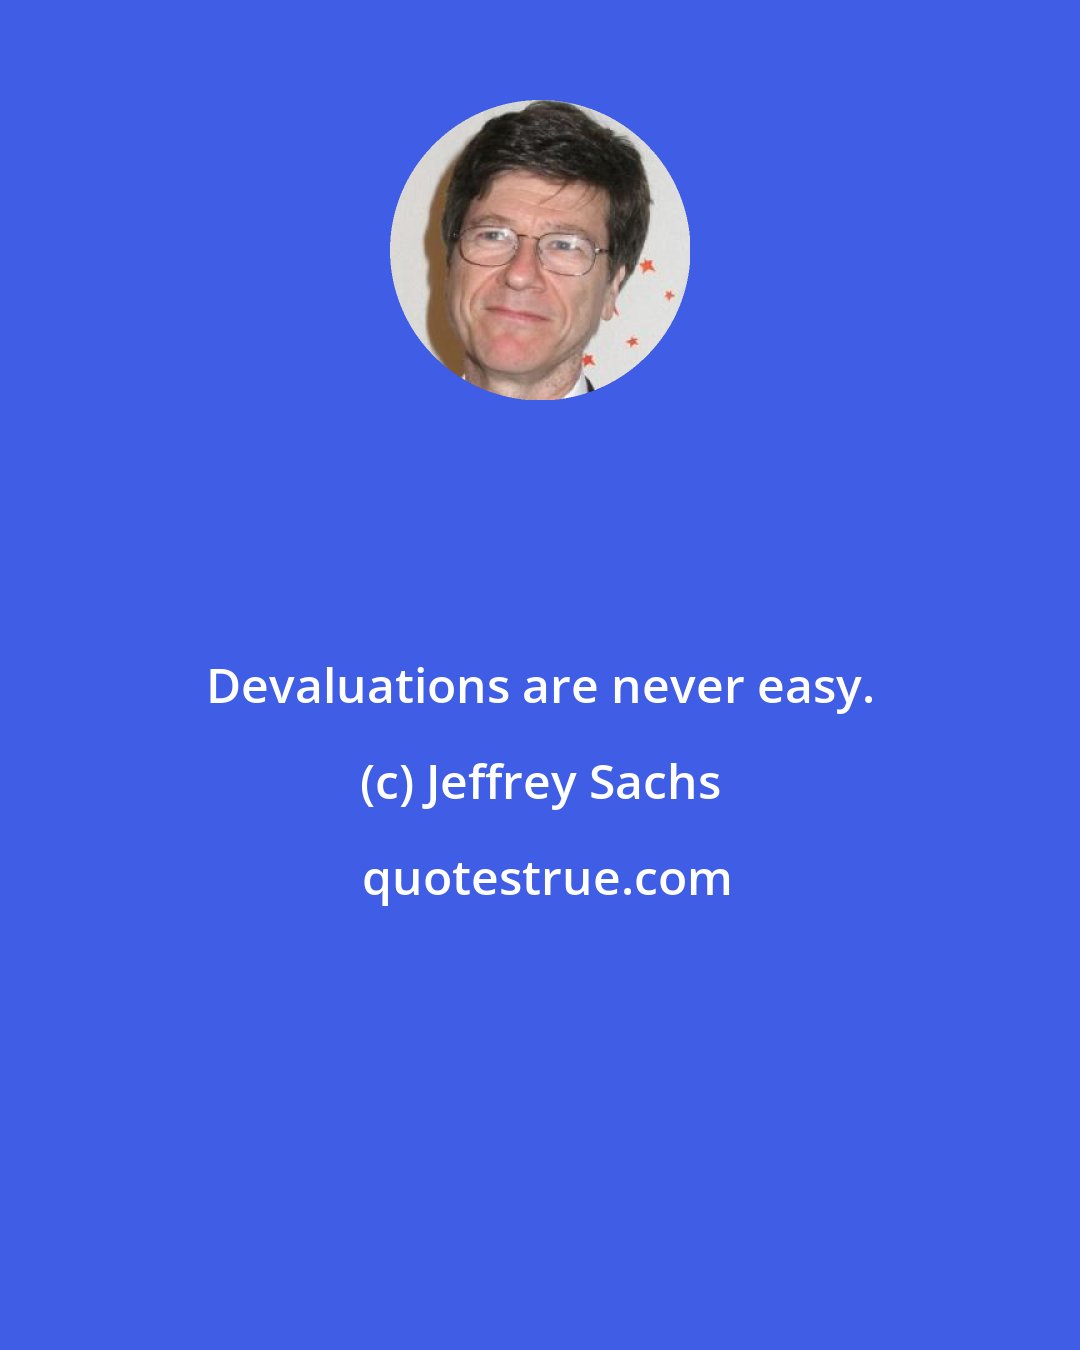 Jeffrey Sachs: Devaluations are never easy.